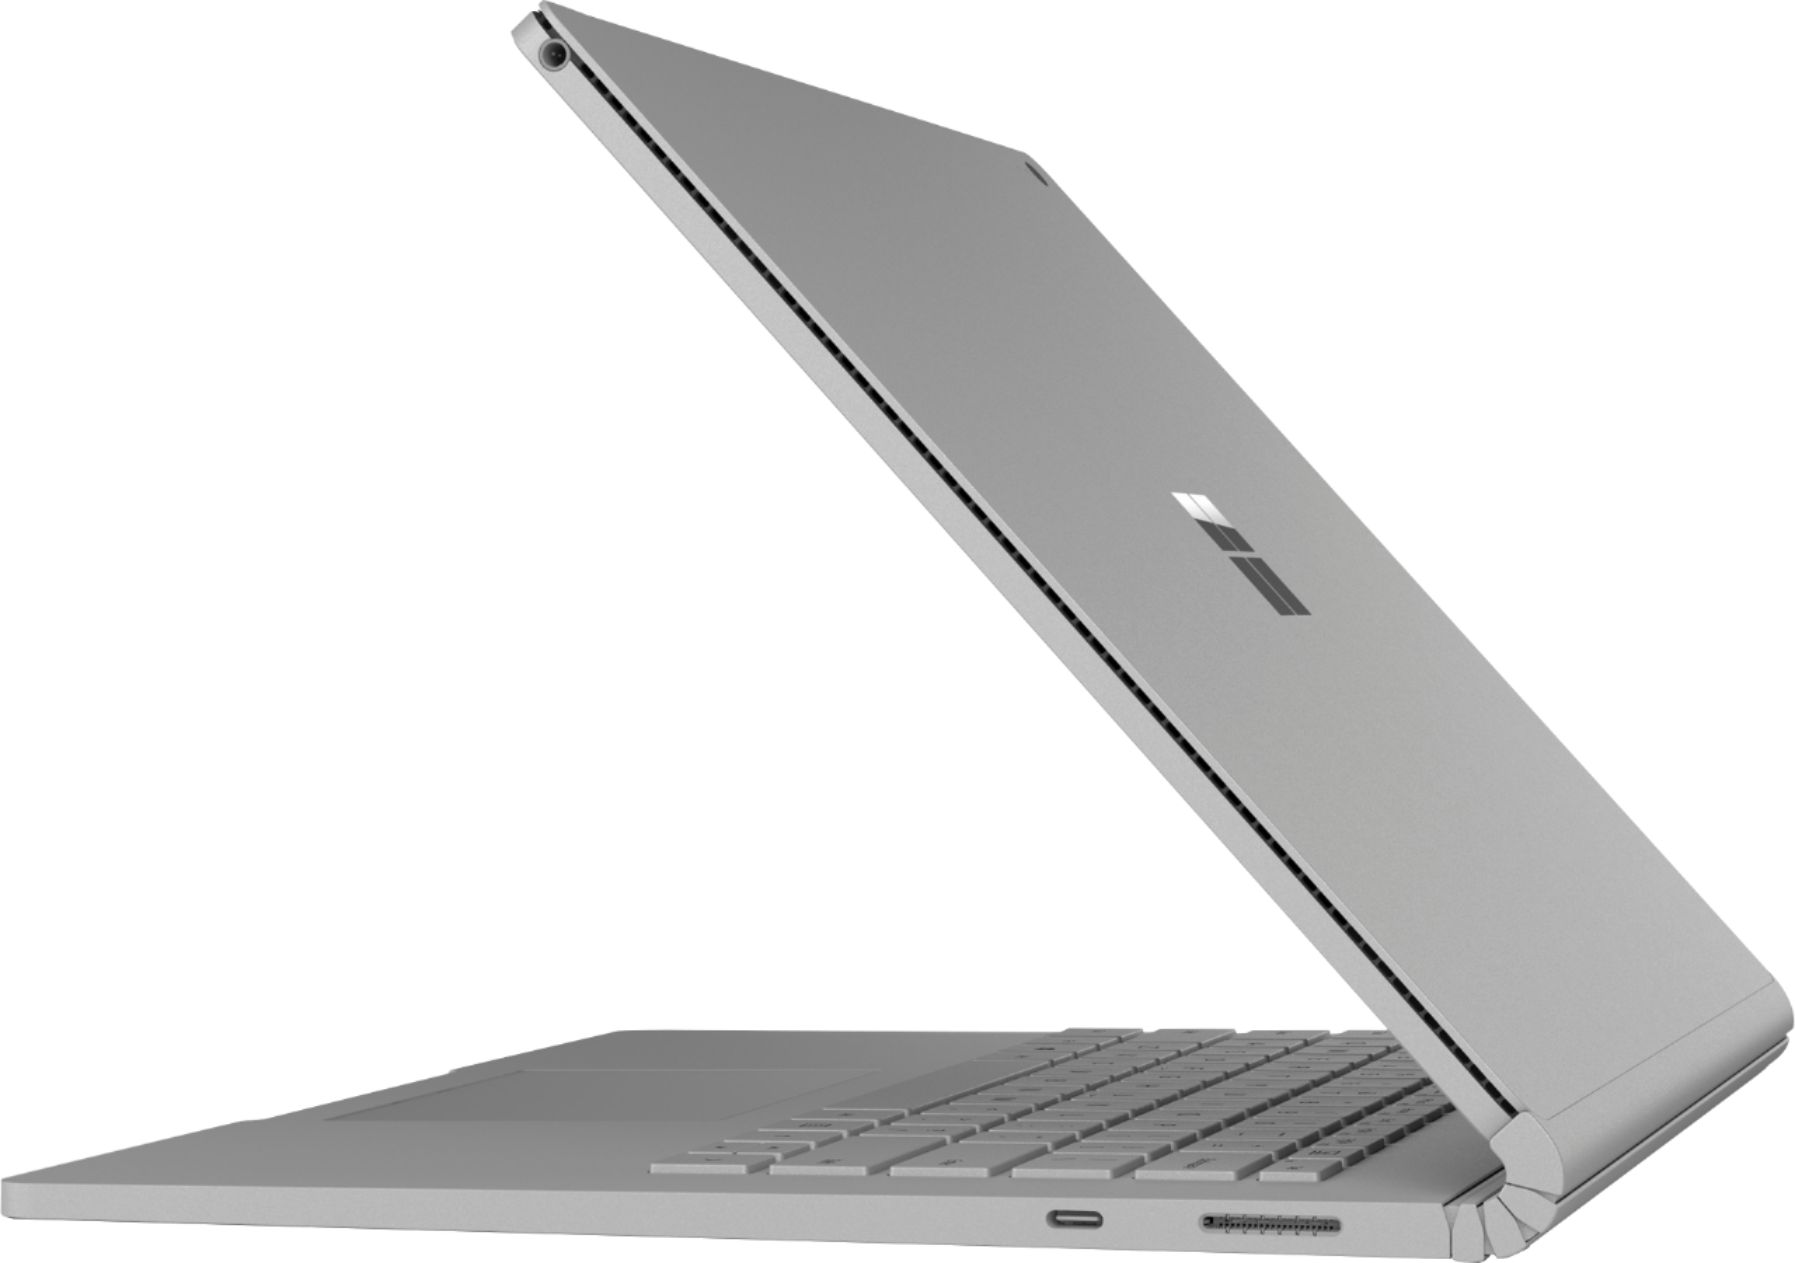 Left View: Microsoft - Surface Book 2 - 13.5" Touch-Screen PixelSense™ - 2-in-1 Laptop - Intel Core i5 - 8GB Memory - 256GB SSD - Platinum